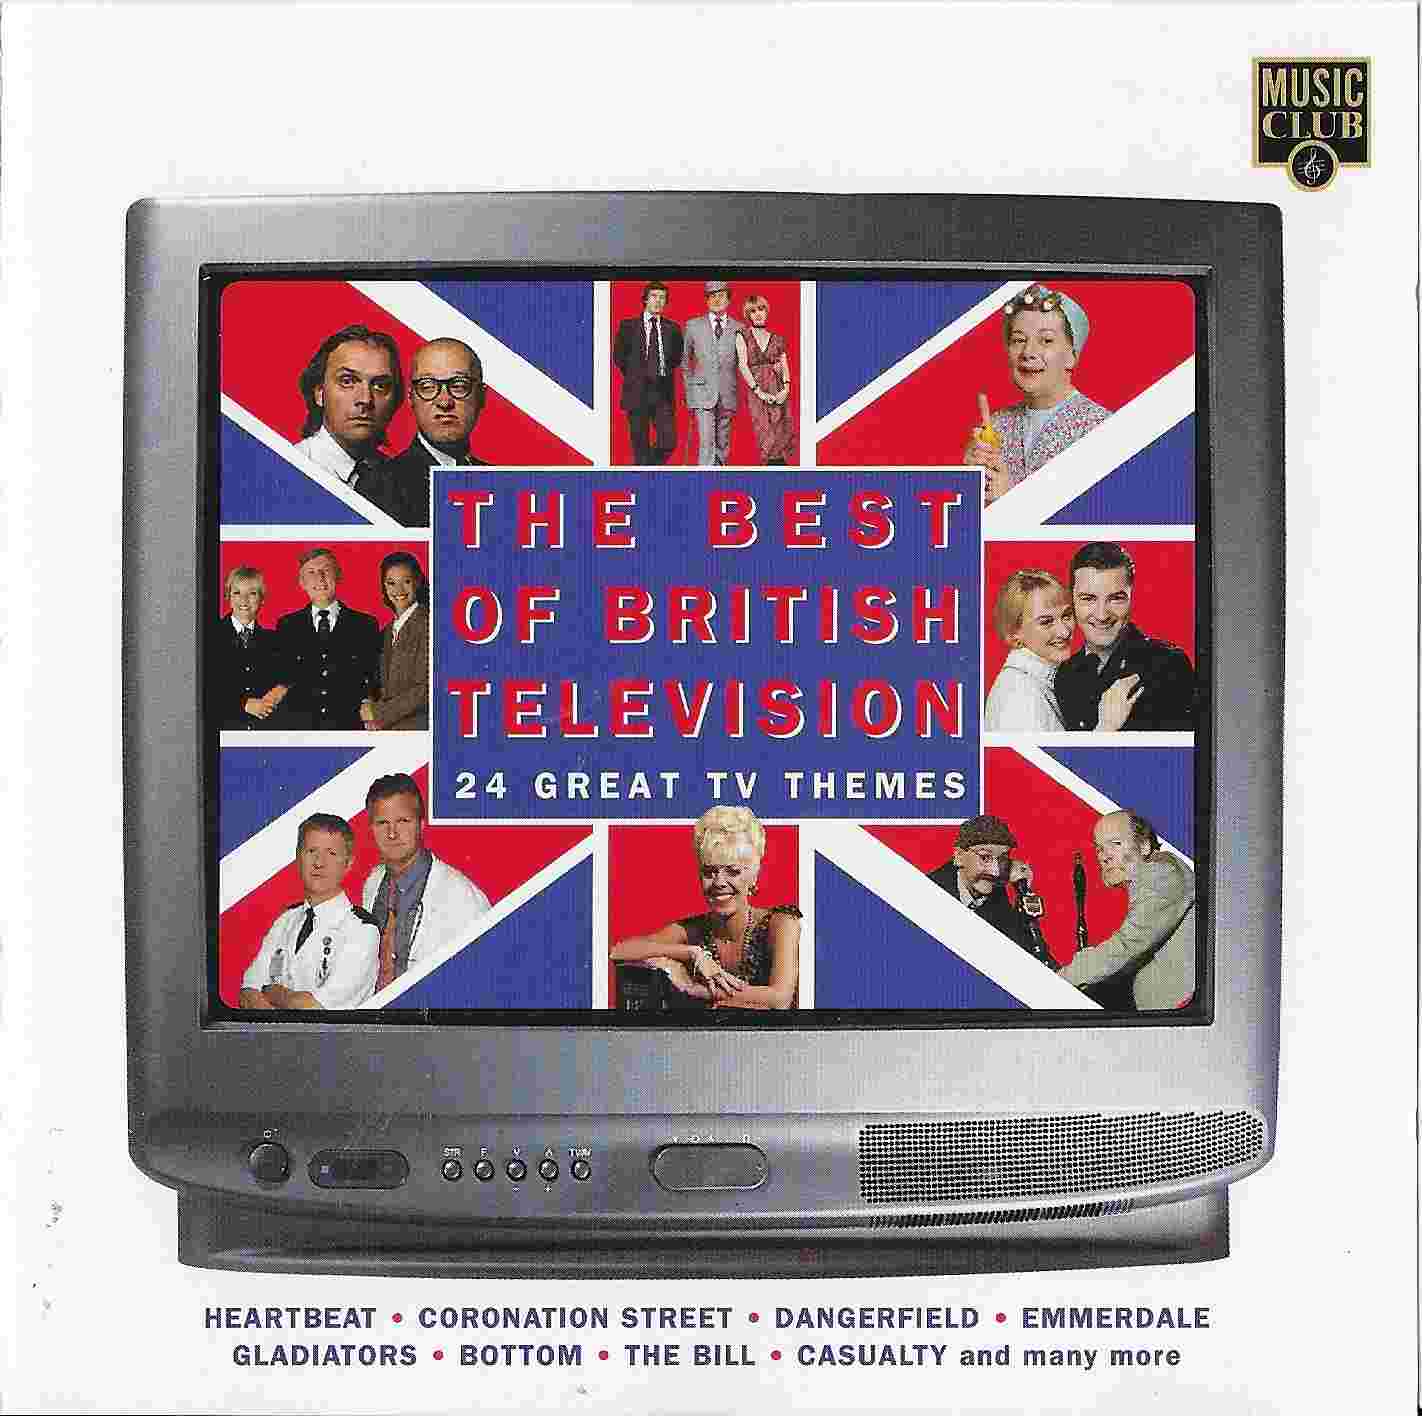 Picture of The best of British television by artist Various from ITV, Channel 4 and Channel 5 cds library